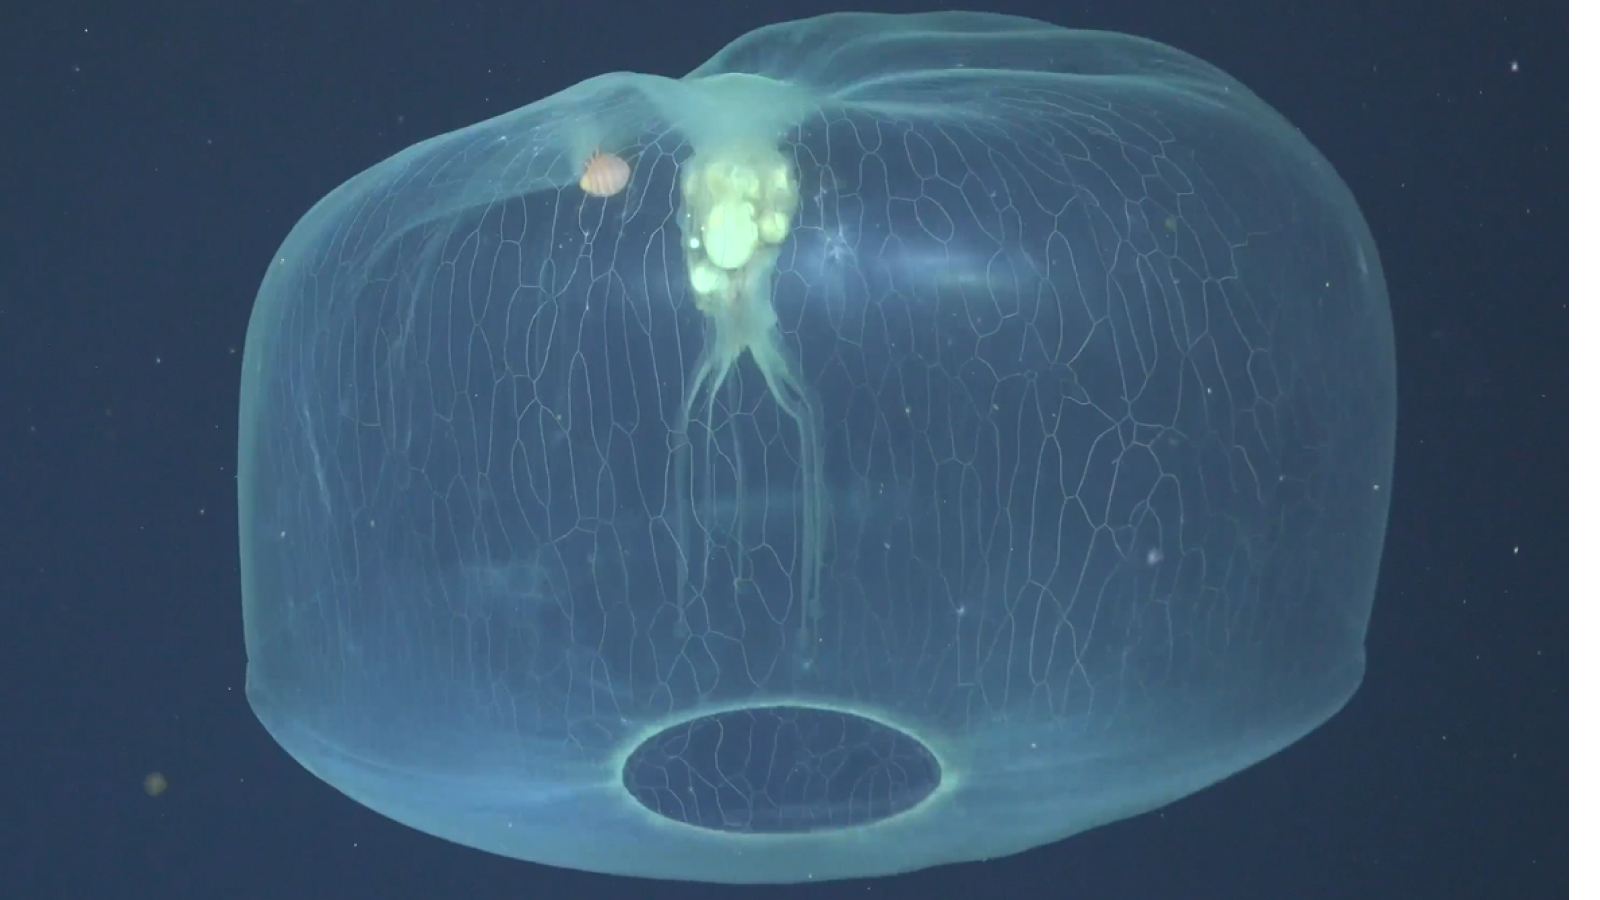 Otherworldly video captures rare jellyfish with a hitchhiker in its bell